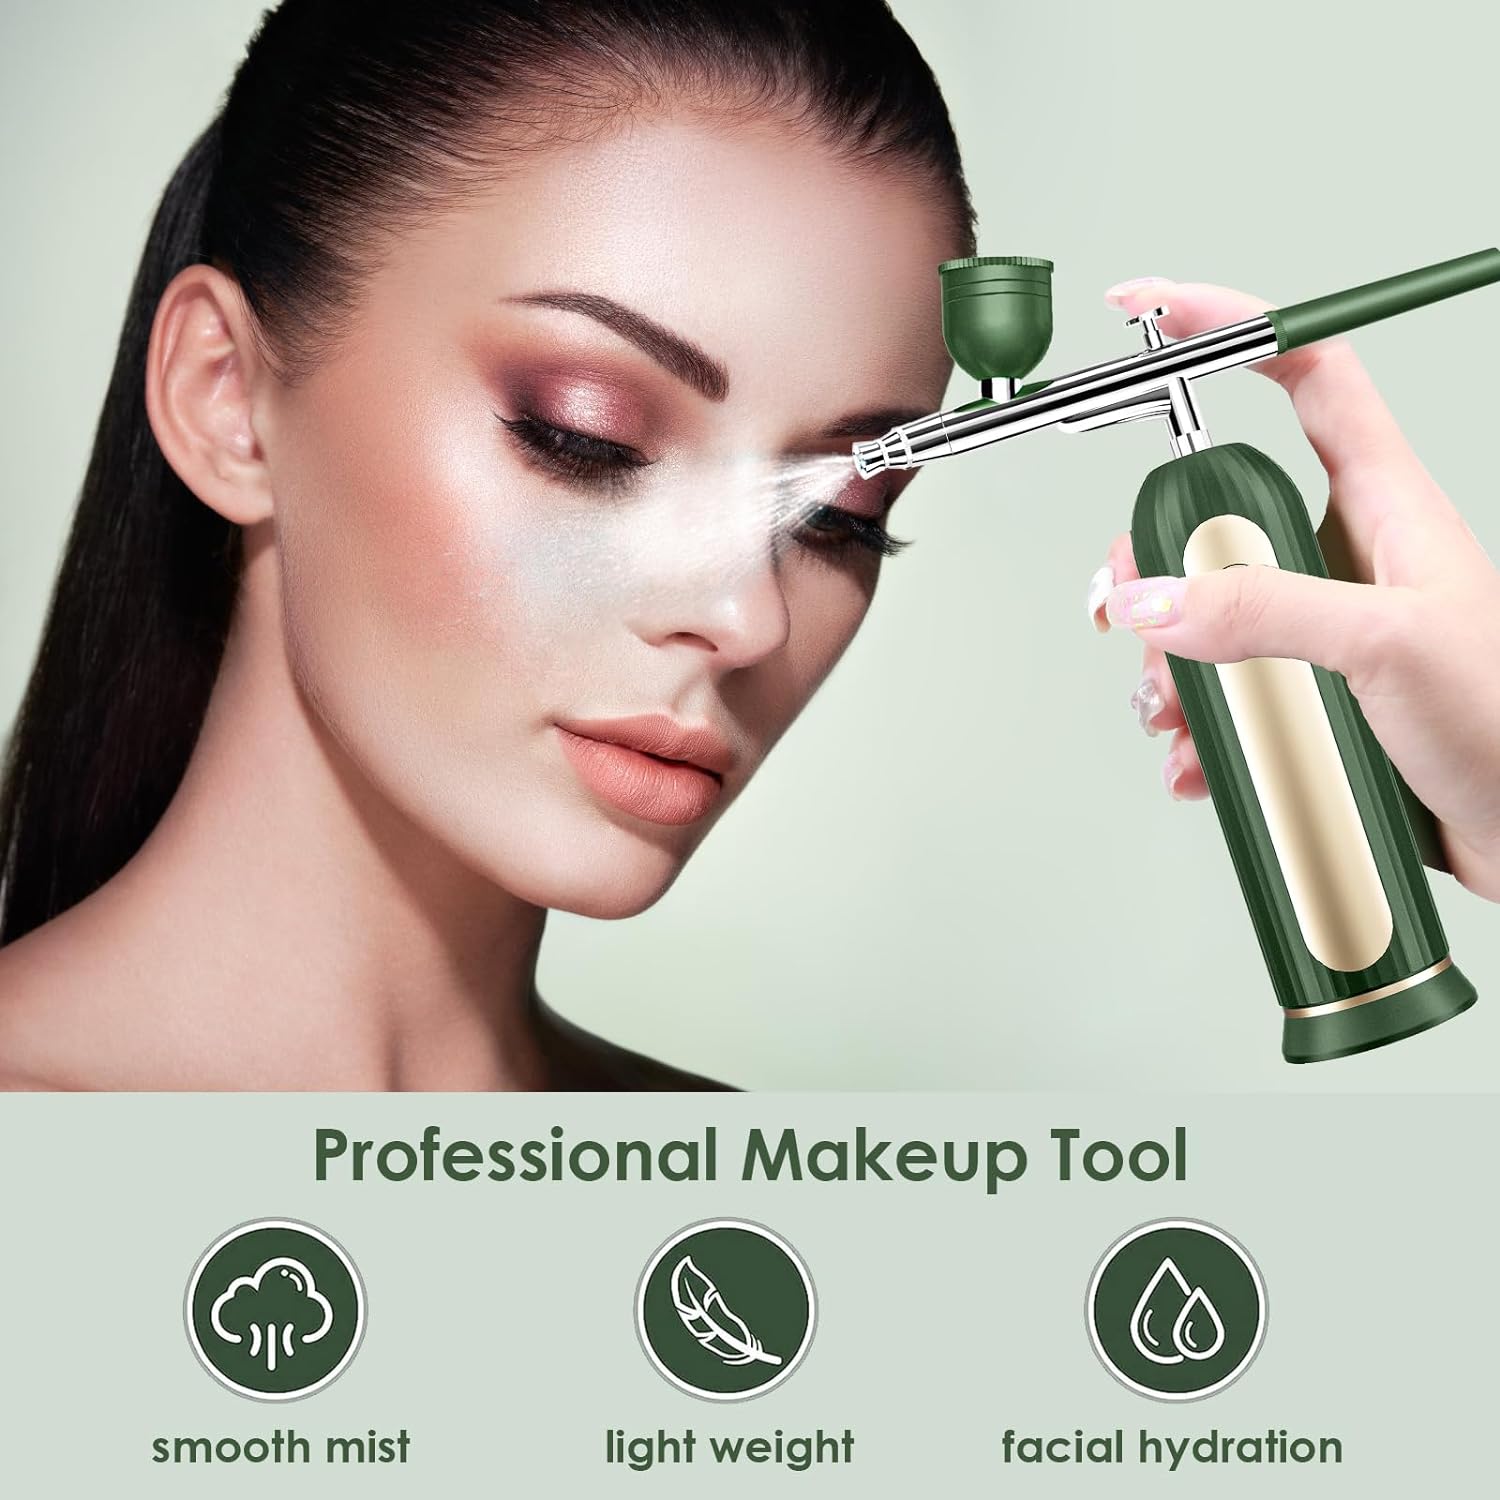 Airbrush Kit Rechargeable Cordless with Compressor - Portable Handheld Auto Airbrush Gun Set for Makeup Painting Cake Decor Nail Art Barbers Model Coloring(Green)